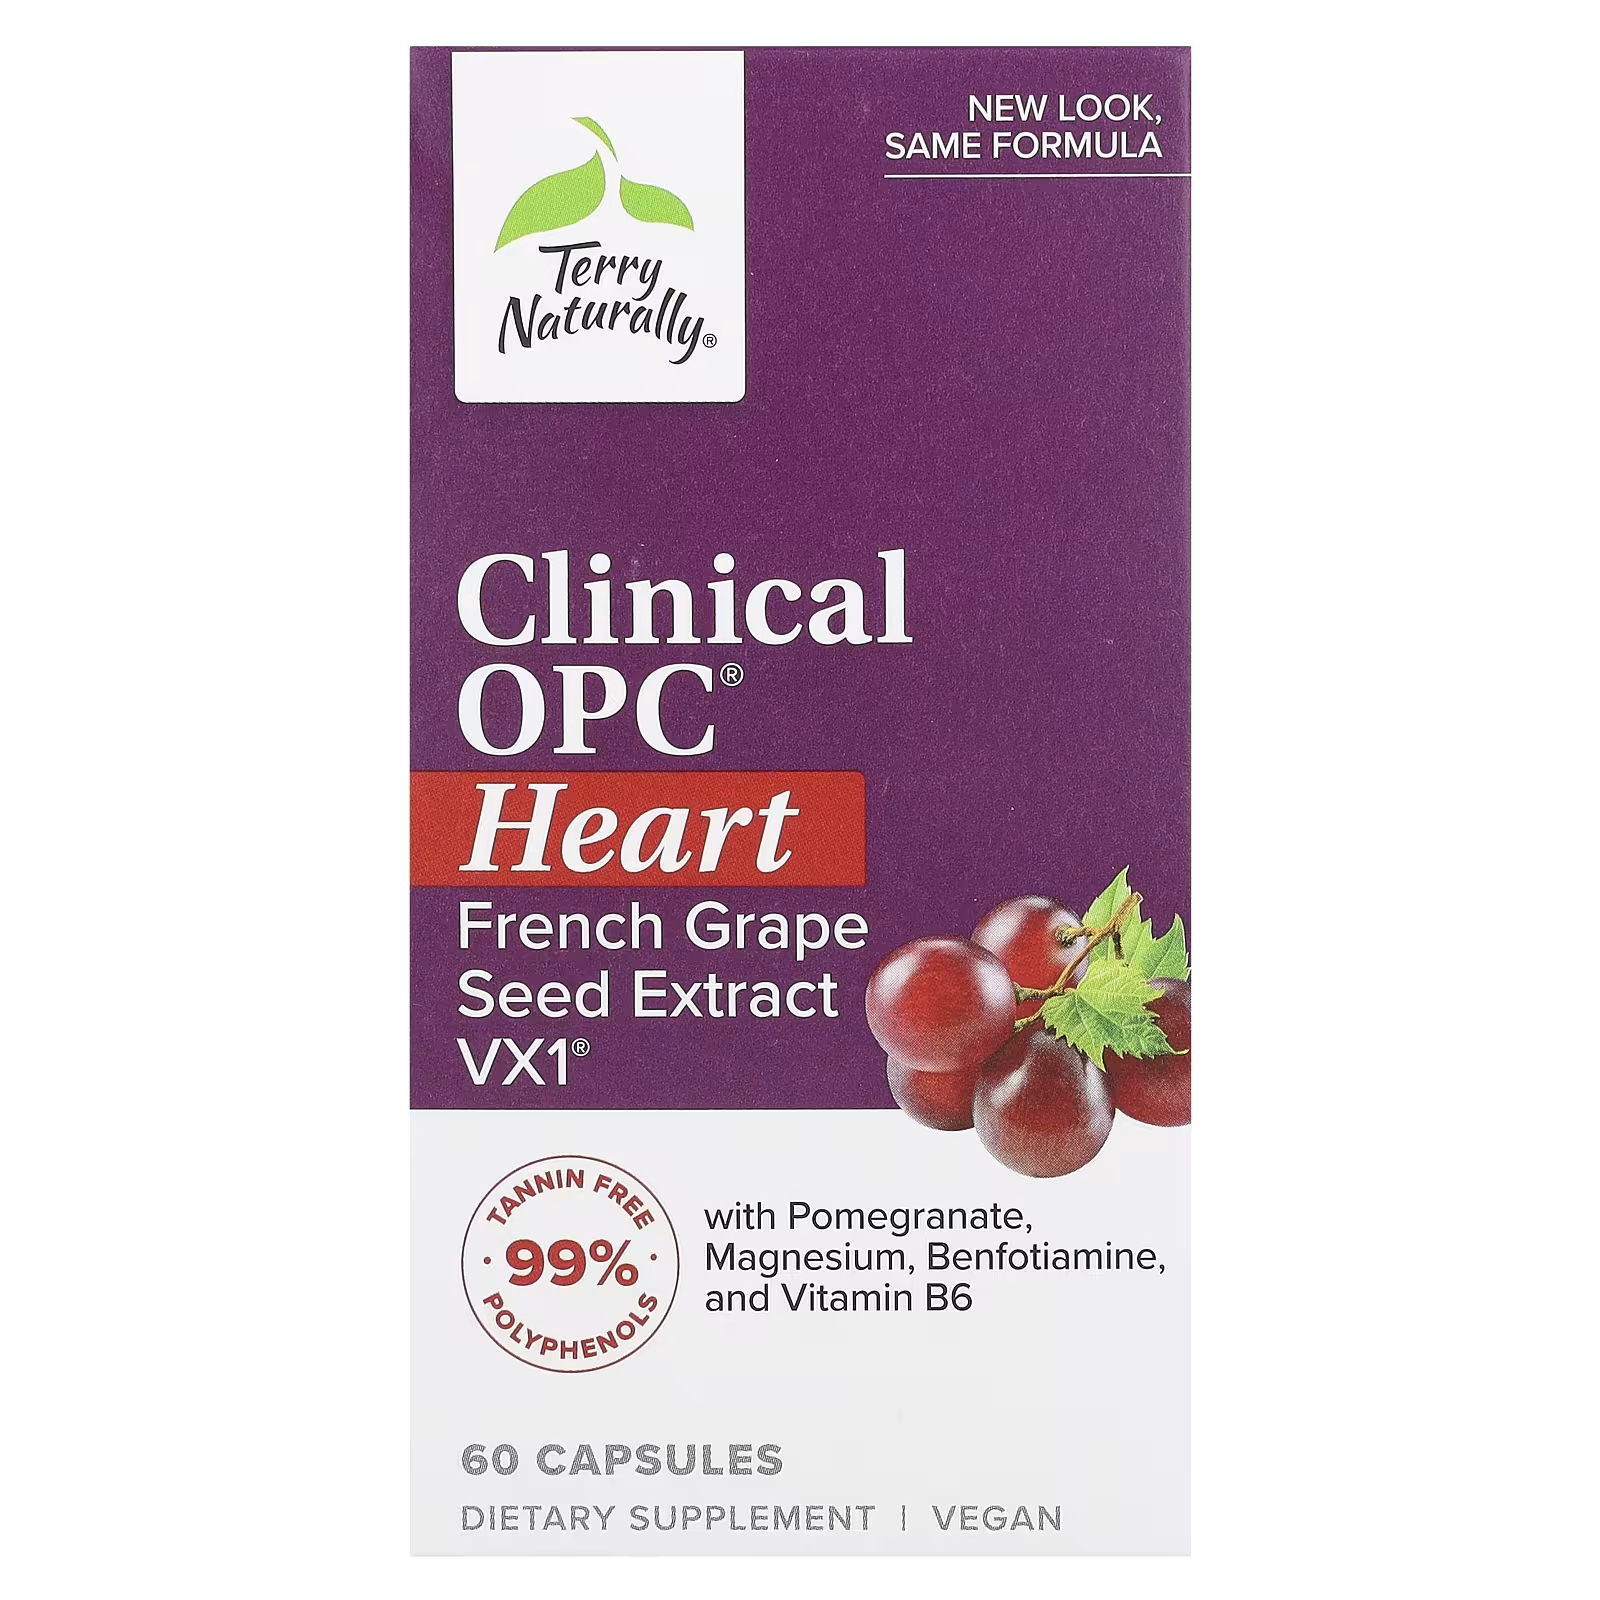 Terry Naturally Clinical OPC Heart 60 капсул terry naturally clinical essentials мультивитамины и минералы 120 капсул